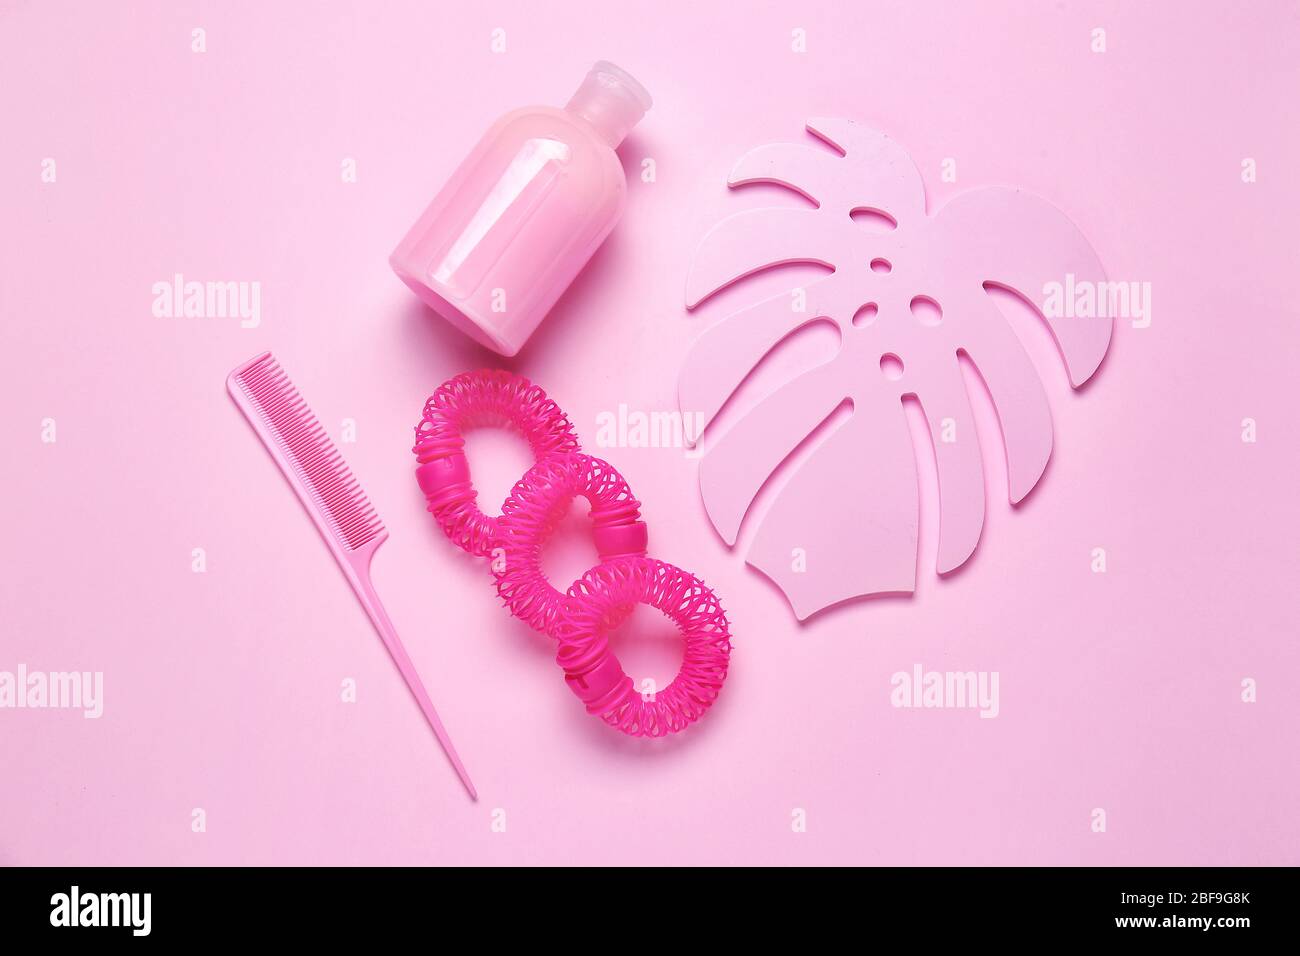 Composition with shampoo, hair ties and comb on color background Stock Photo